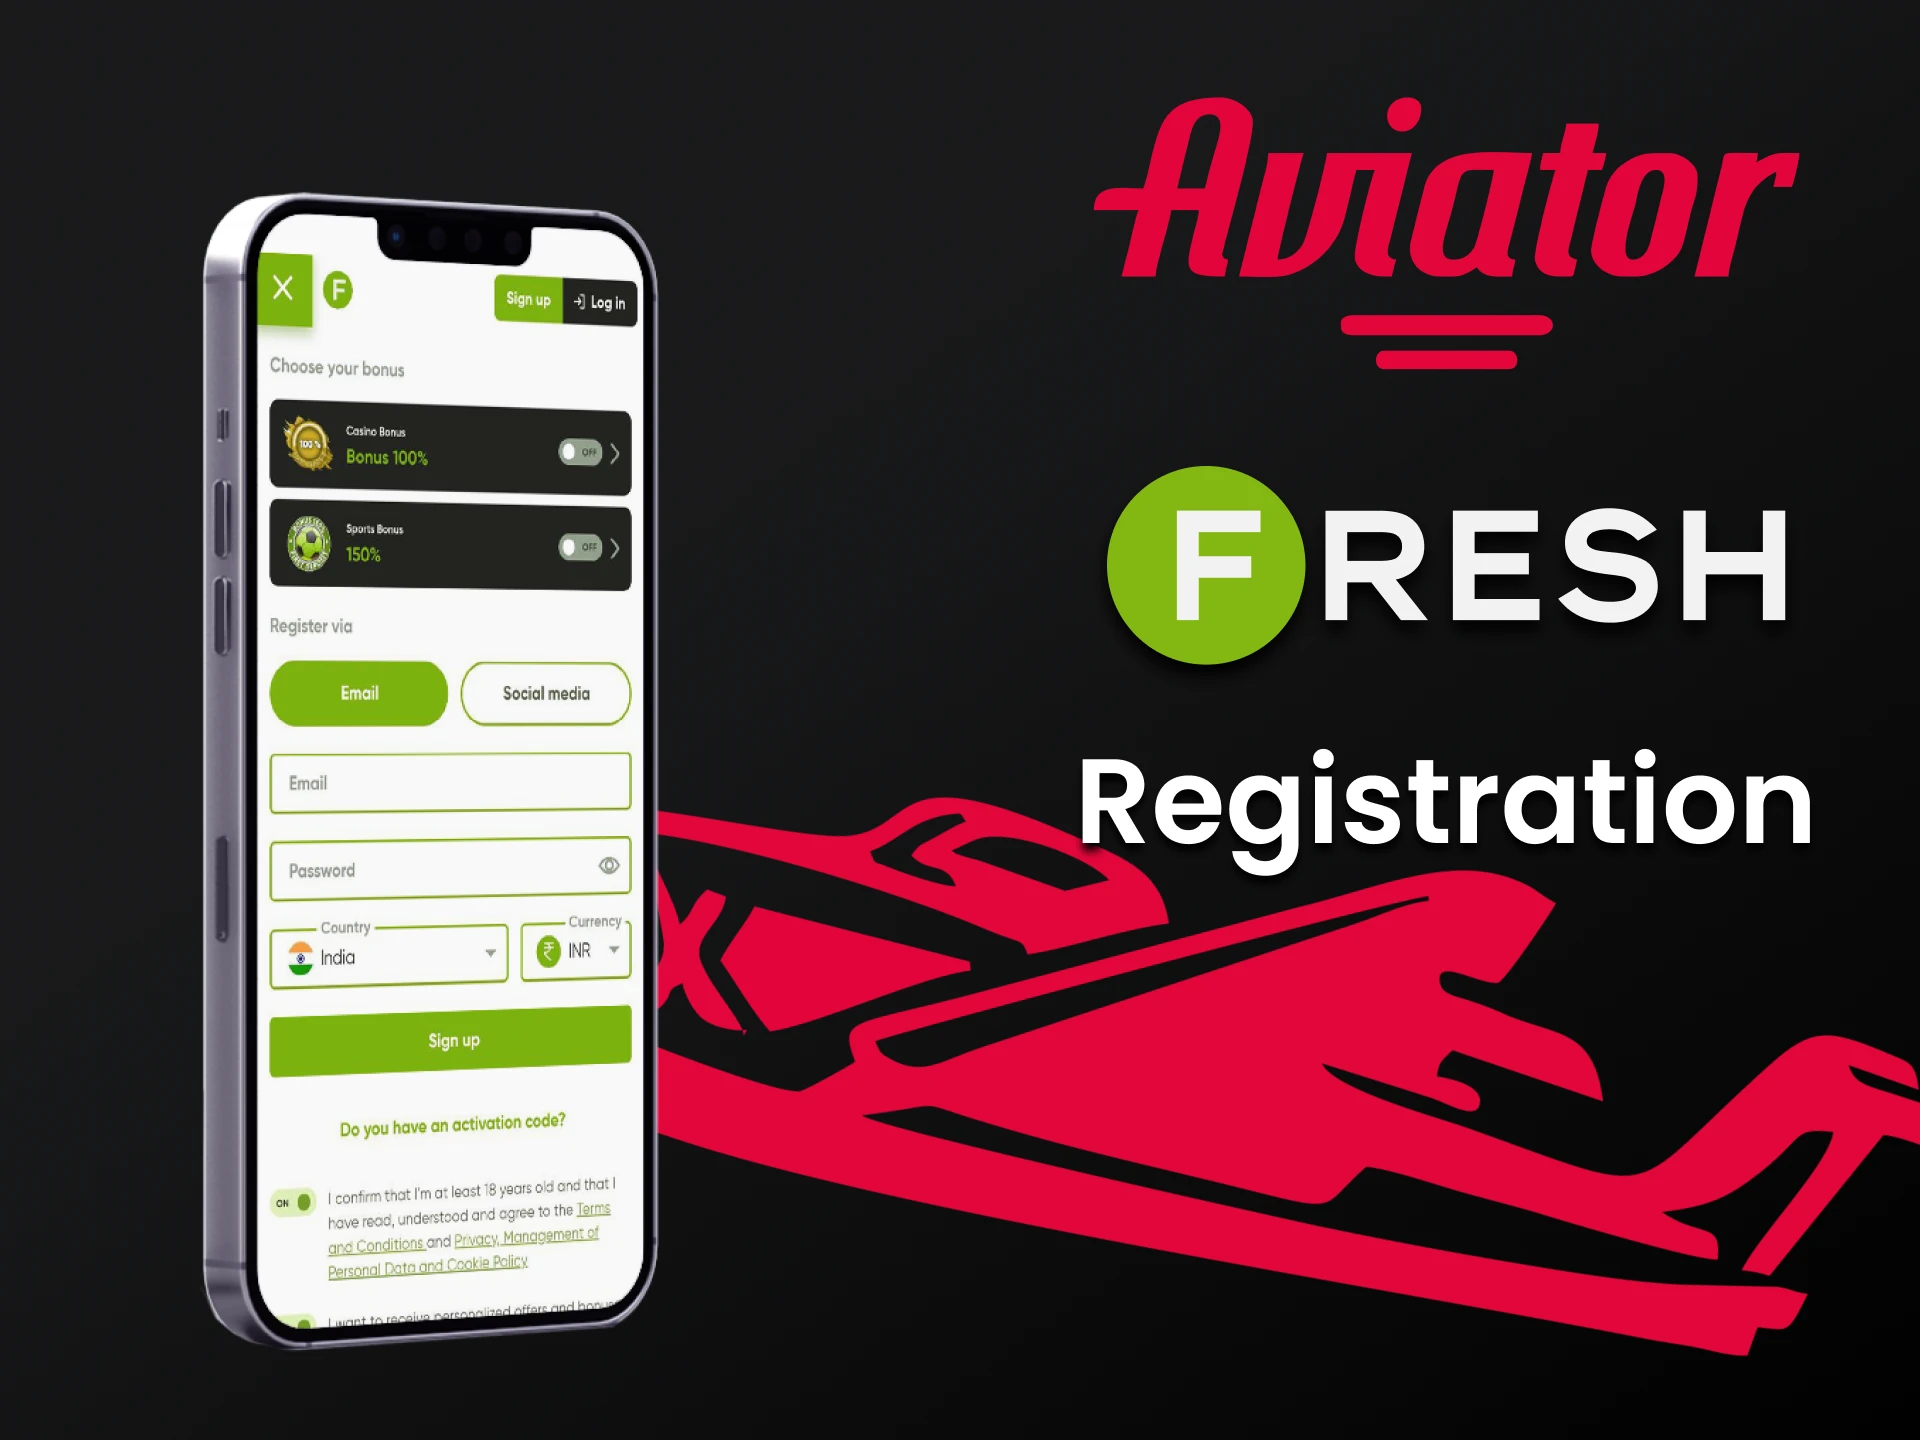 You can register in the Fresh Casino application.